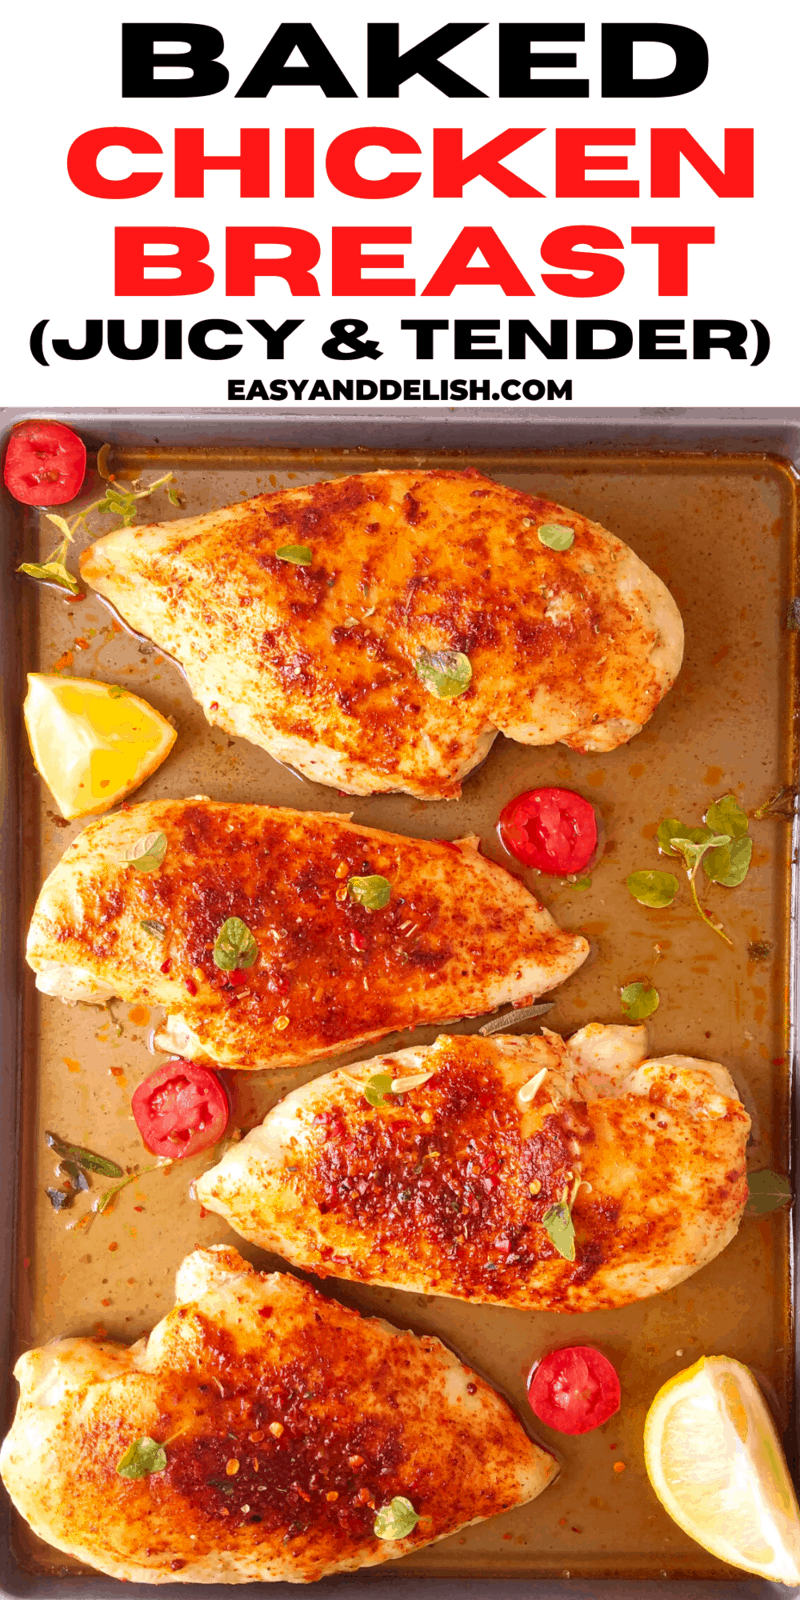 How to Bake Chicken Breast (and How Long) - Easy and Delish